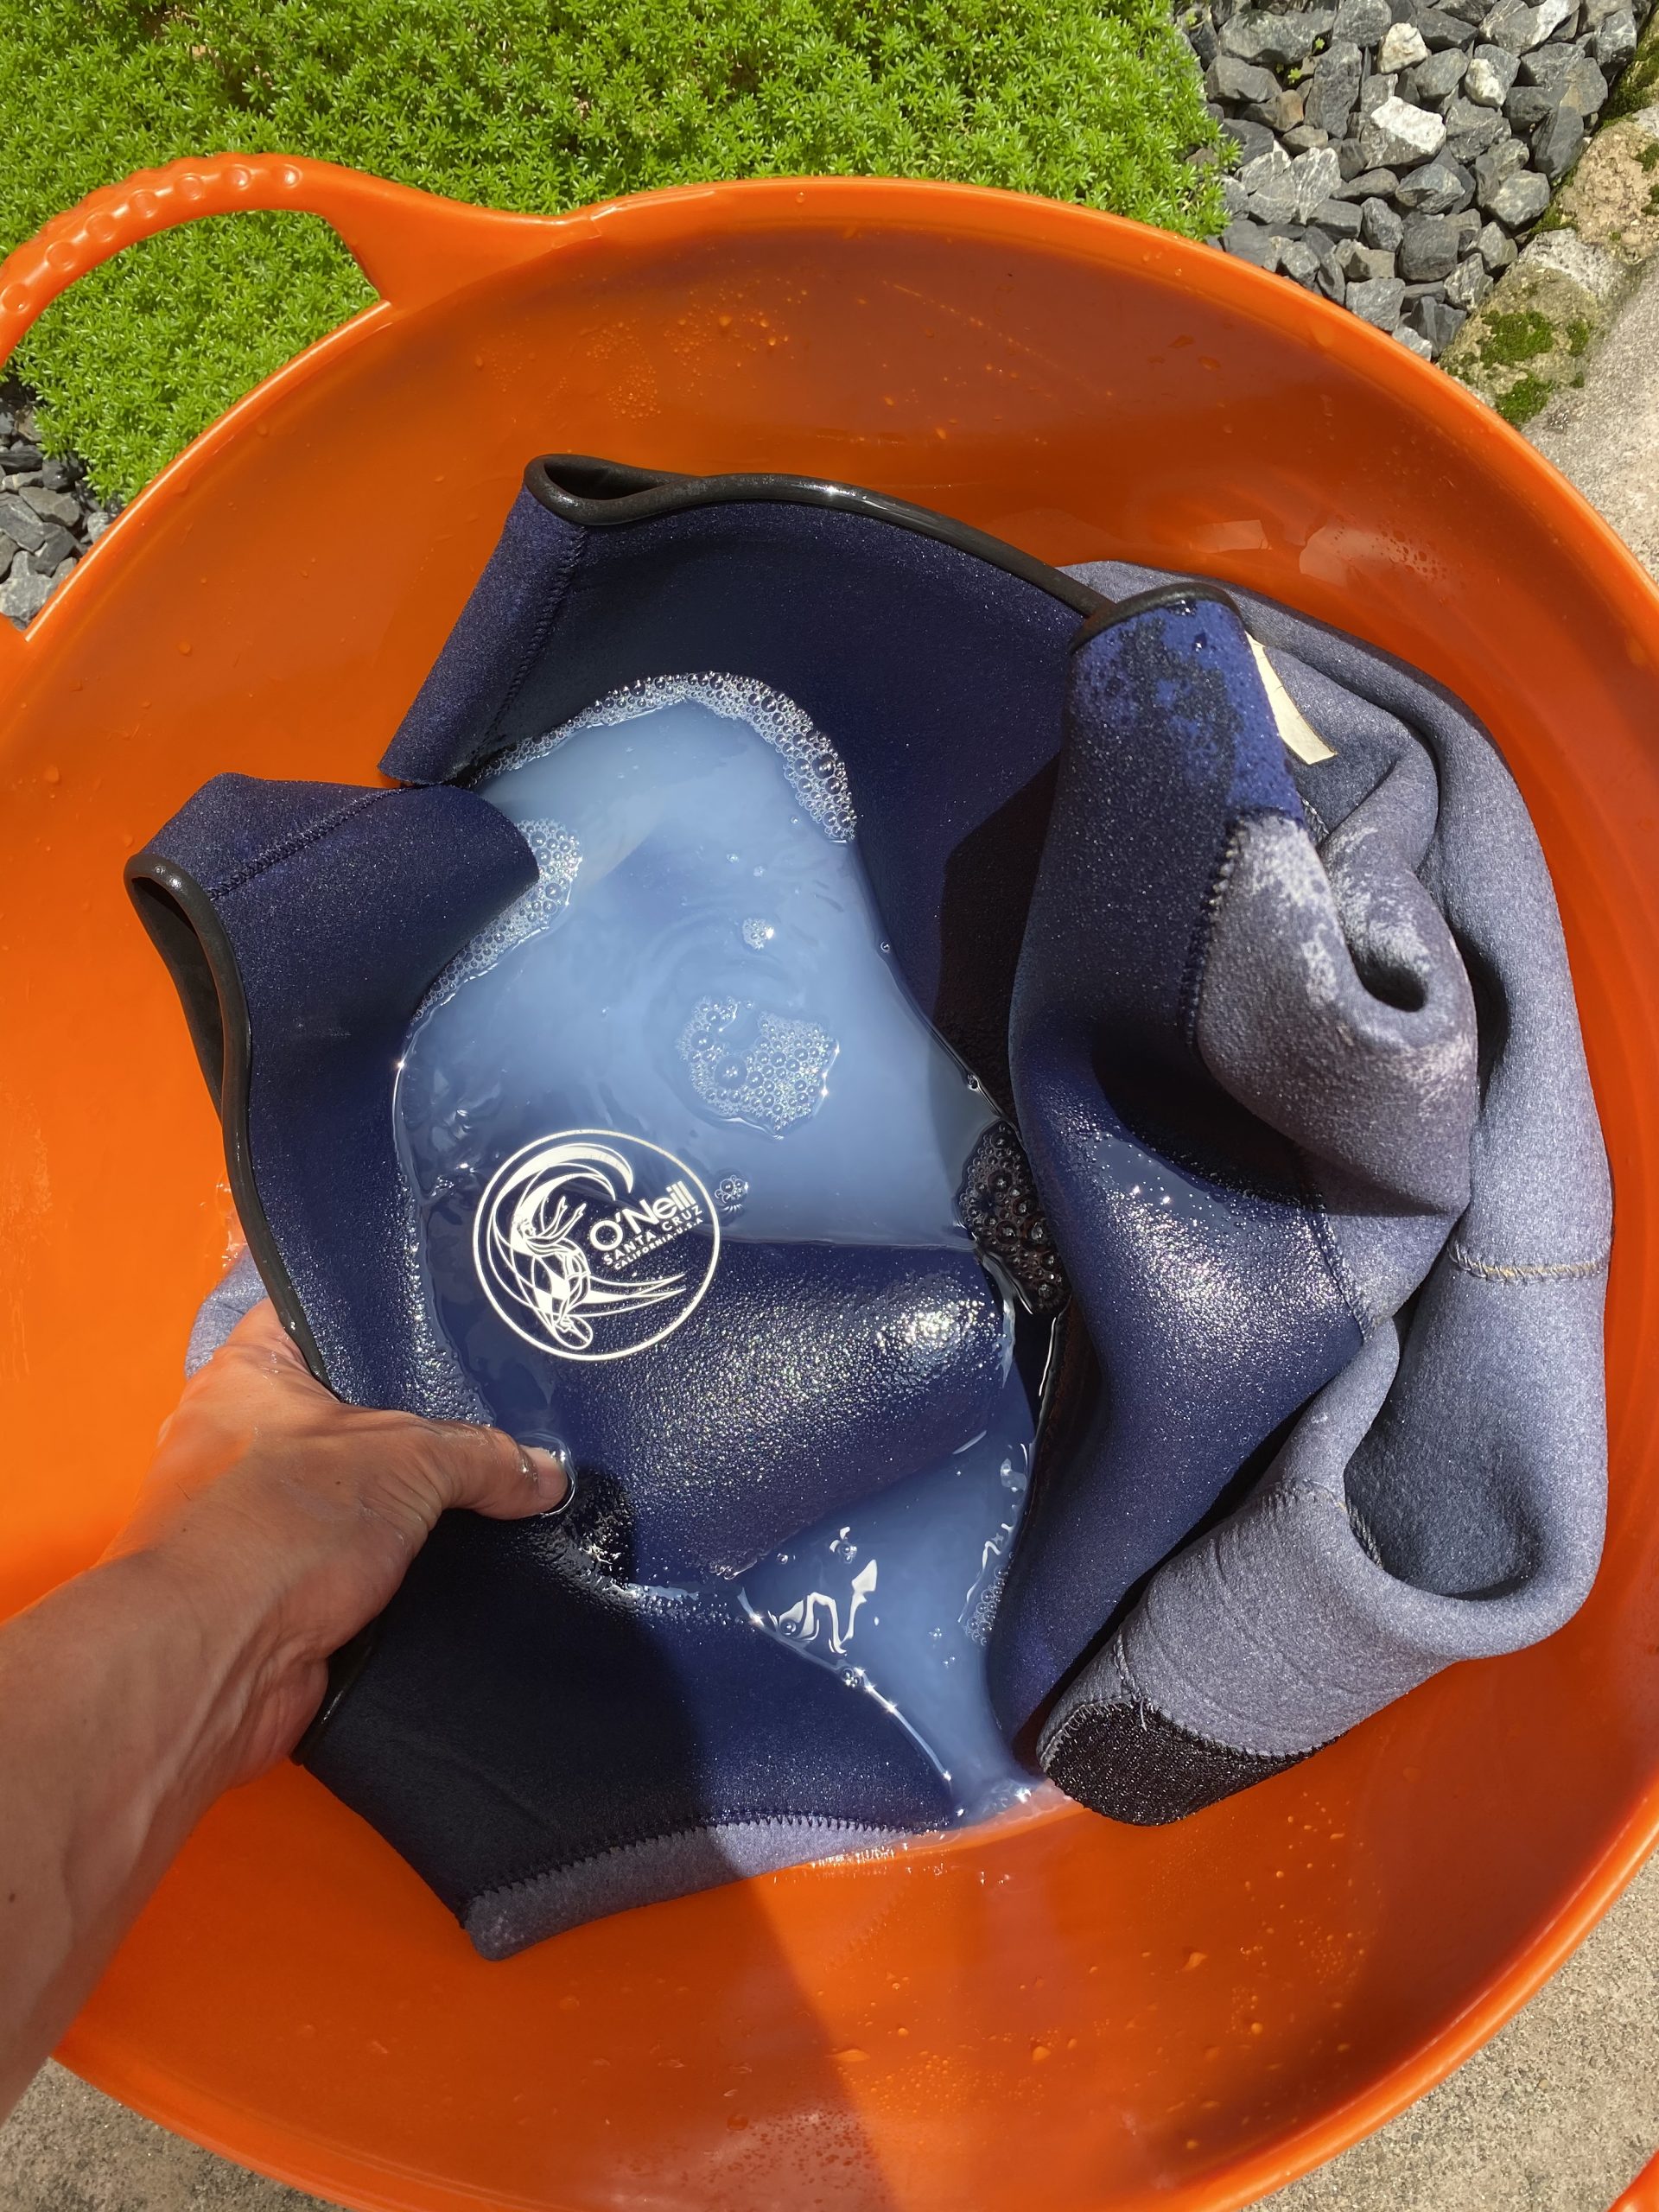 BEACHED DAYS ウエットスーツも洗える！多目的シャンプー Natural Detergent for Wetsuits  Clothing  | サーフショップ MAR SURF CREW